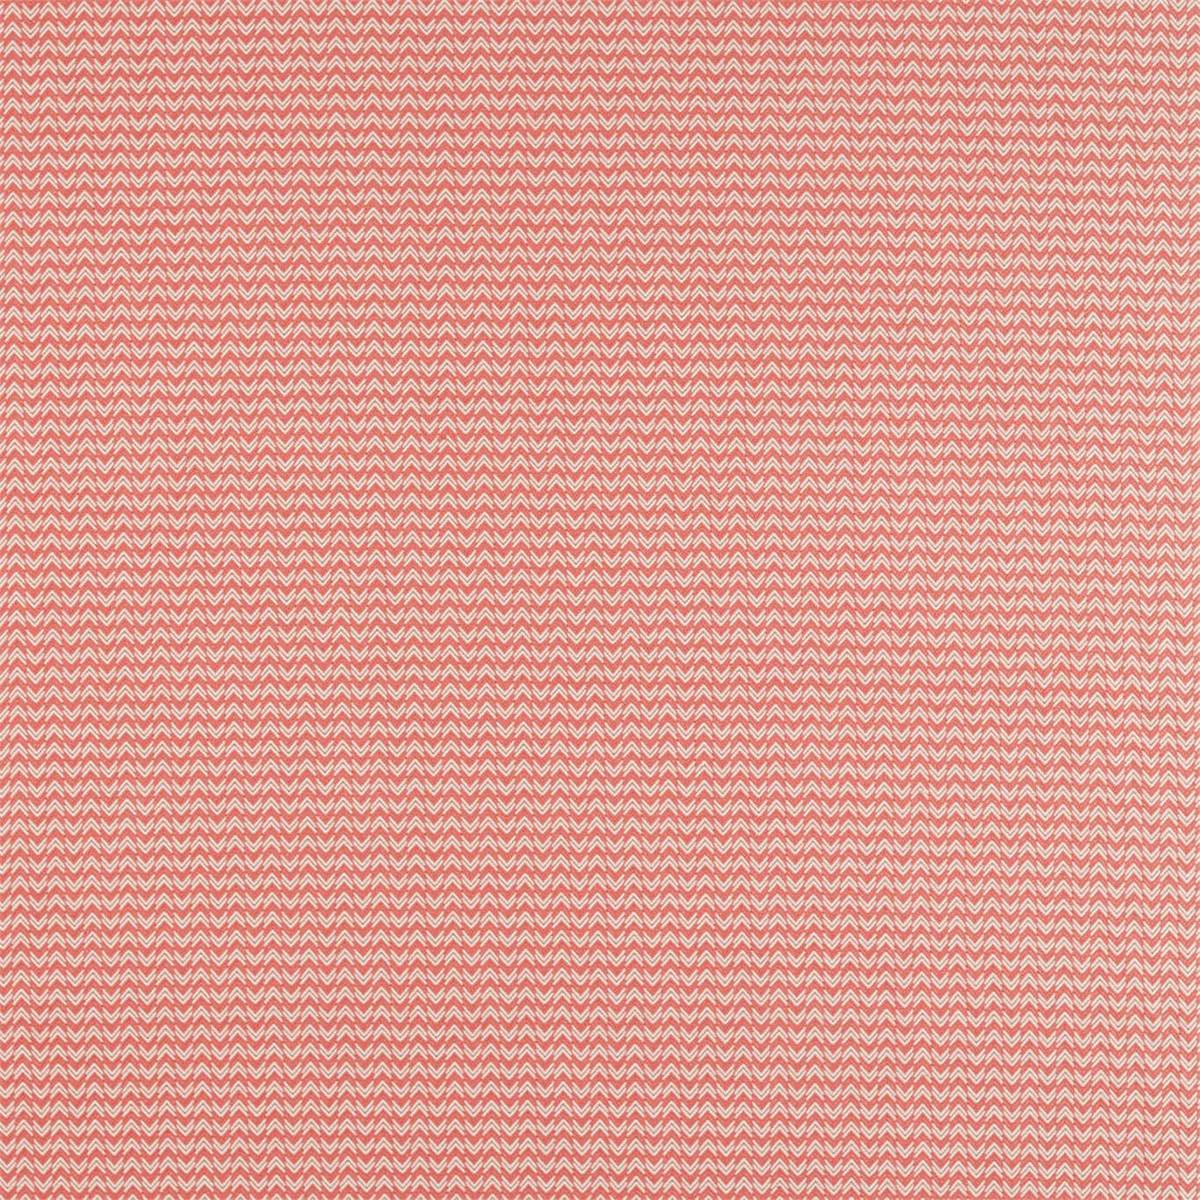 Herring Coral Fabric by Sanderson